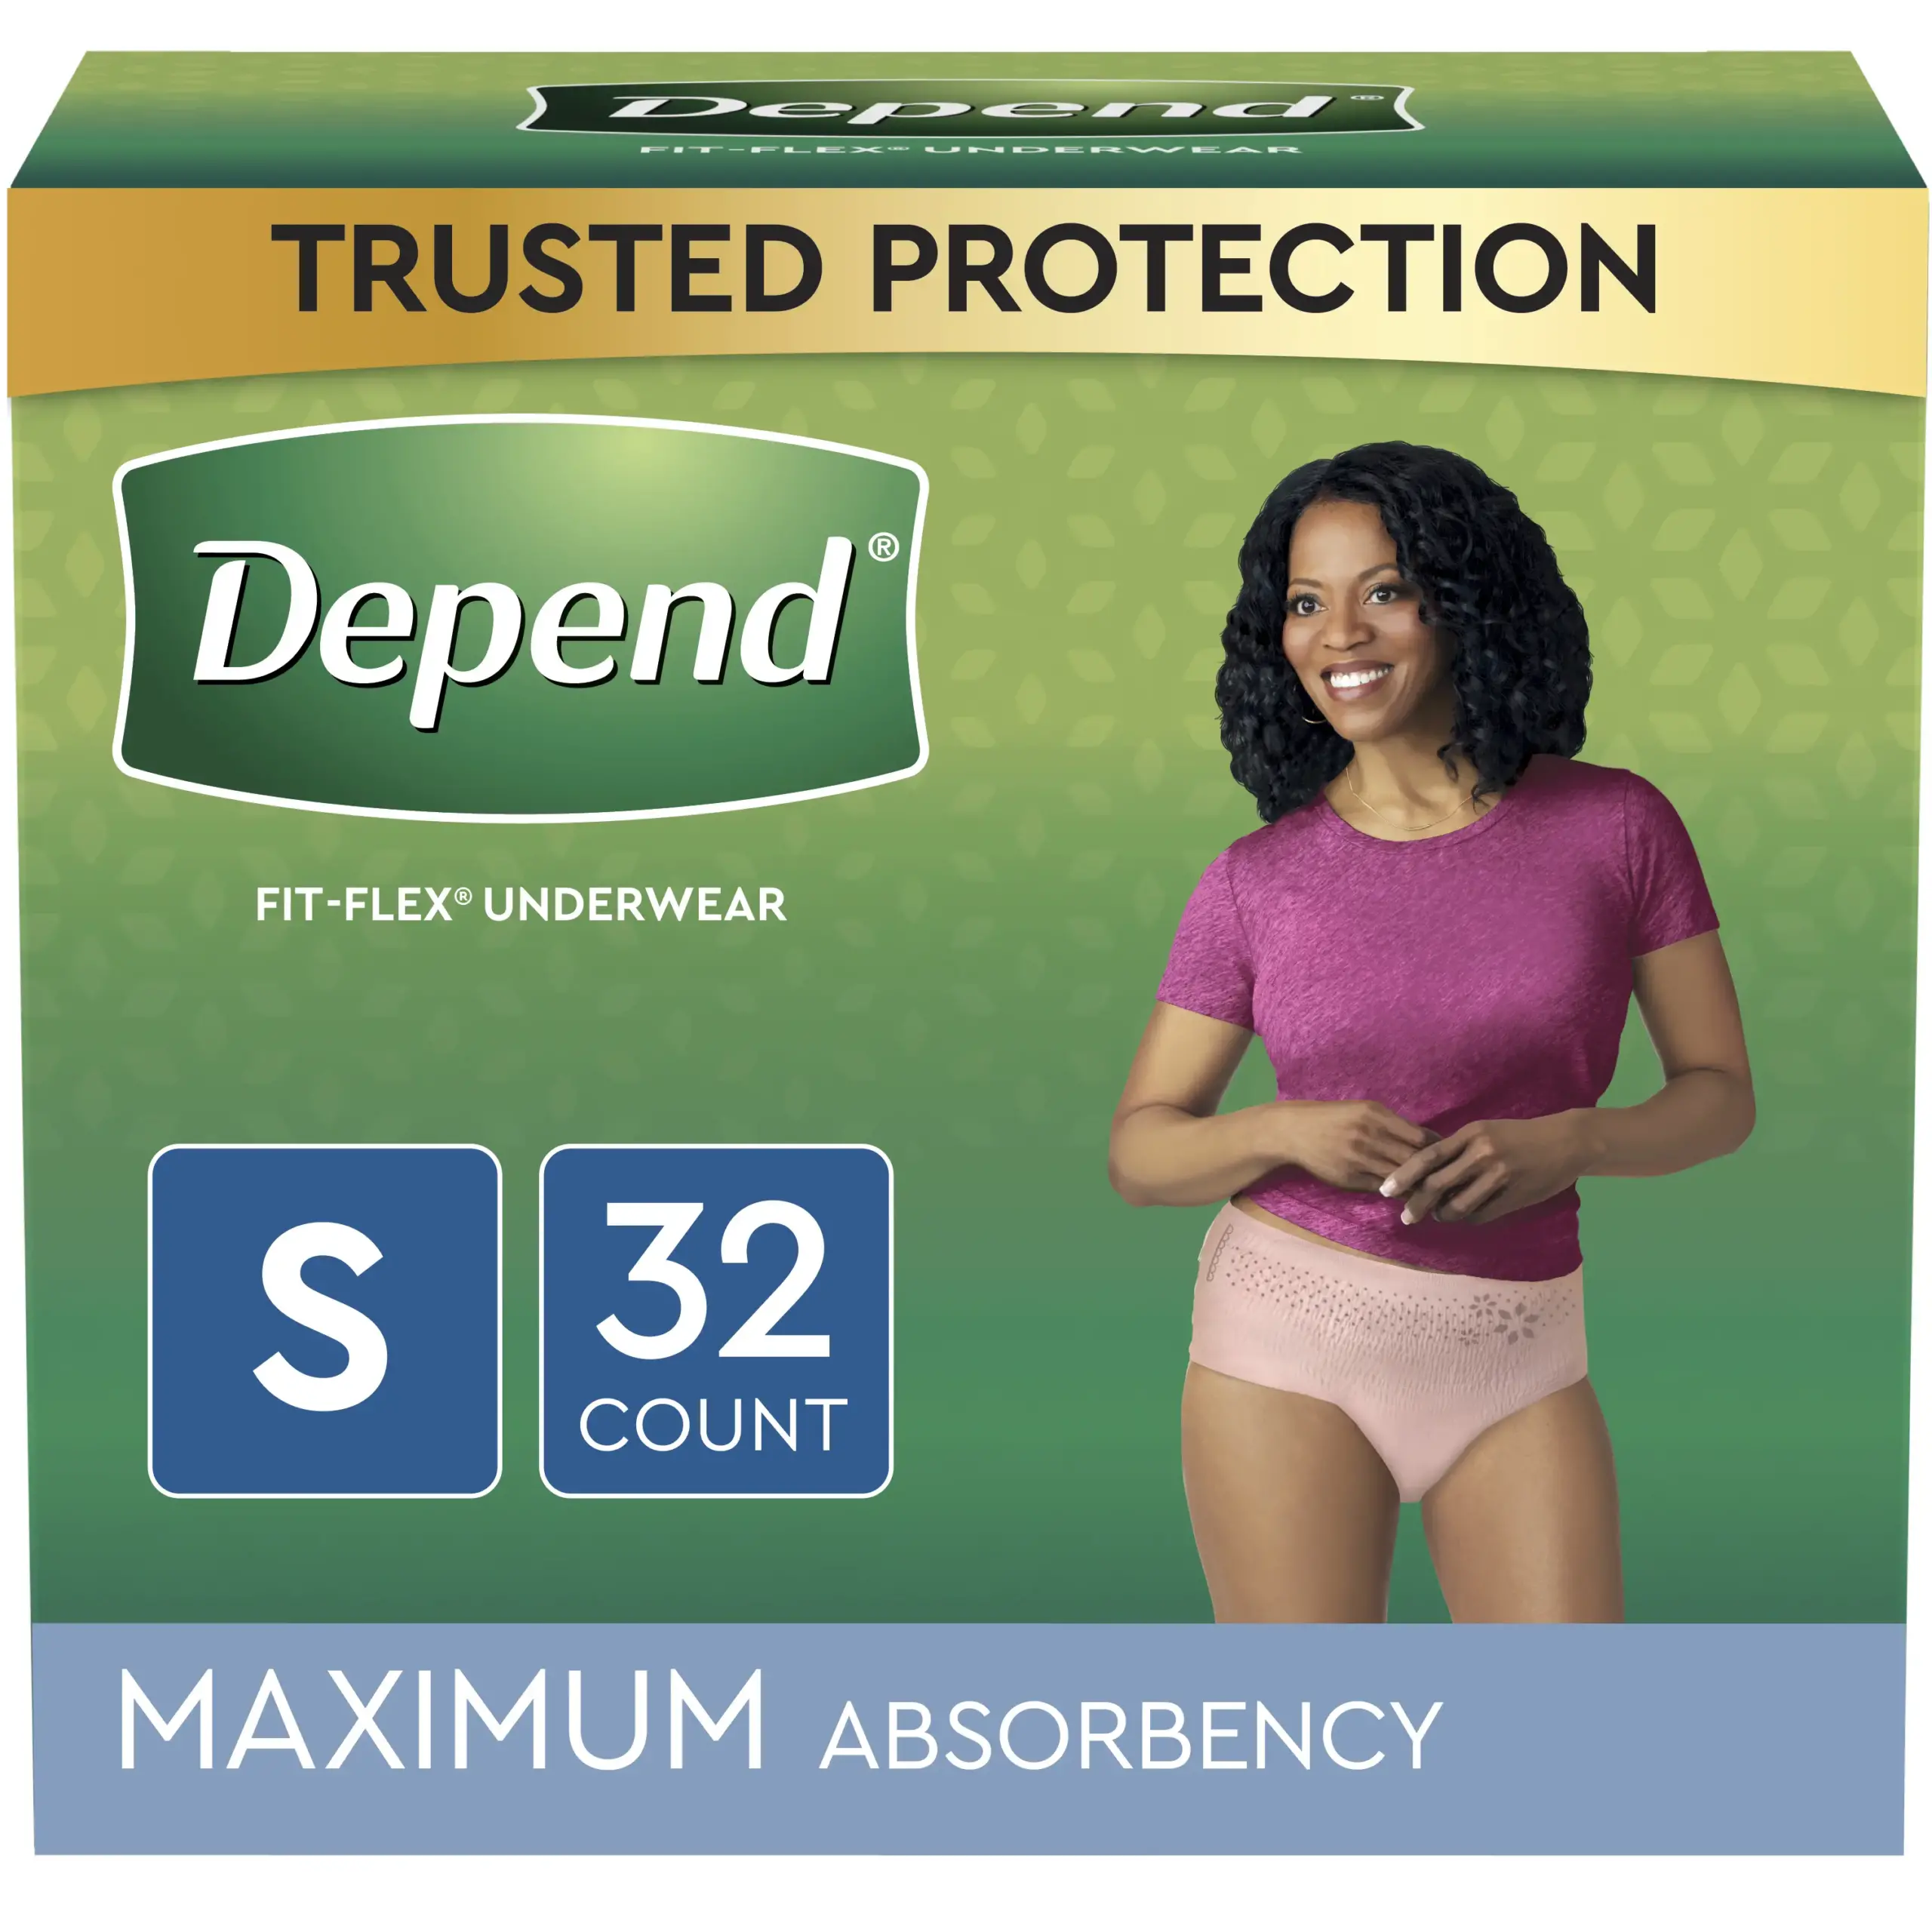 Depend FIT-FLEX Incontinence Underwear for Women, Maximum Absorbency, Small, Blush, 32 Count, Replaces Item 6947920.